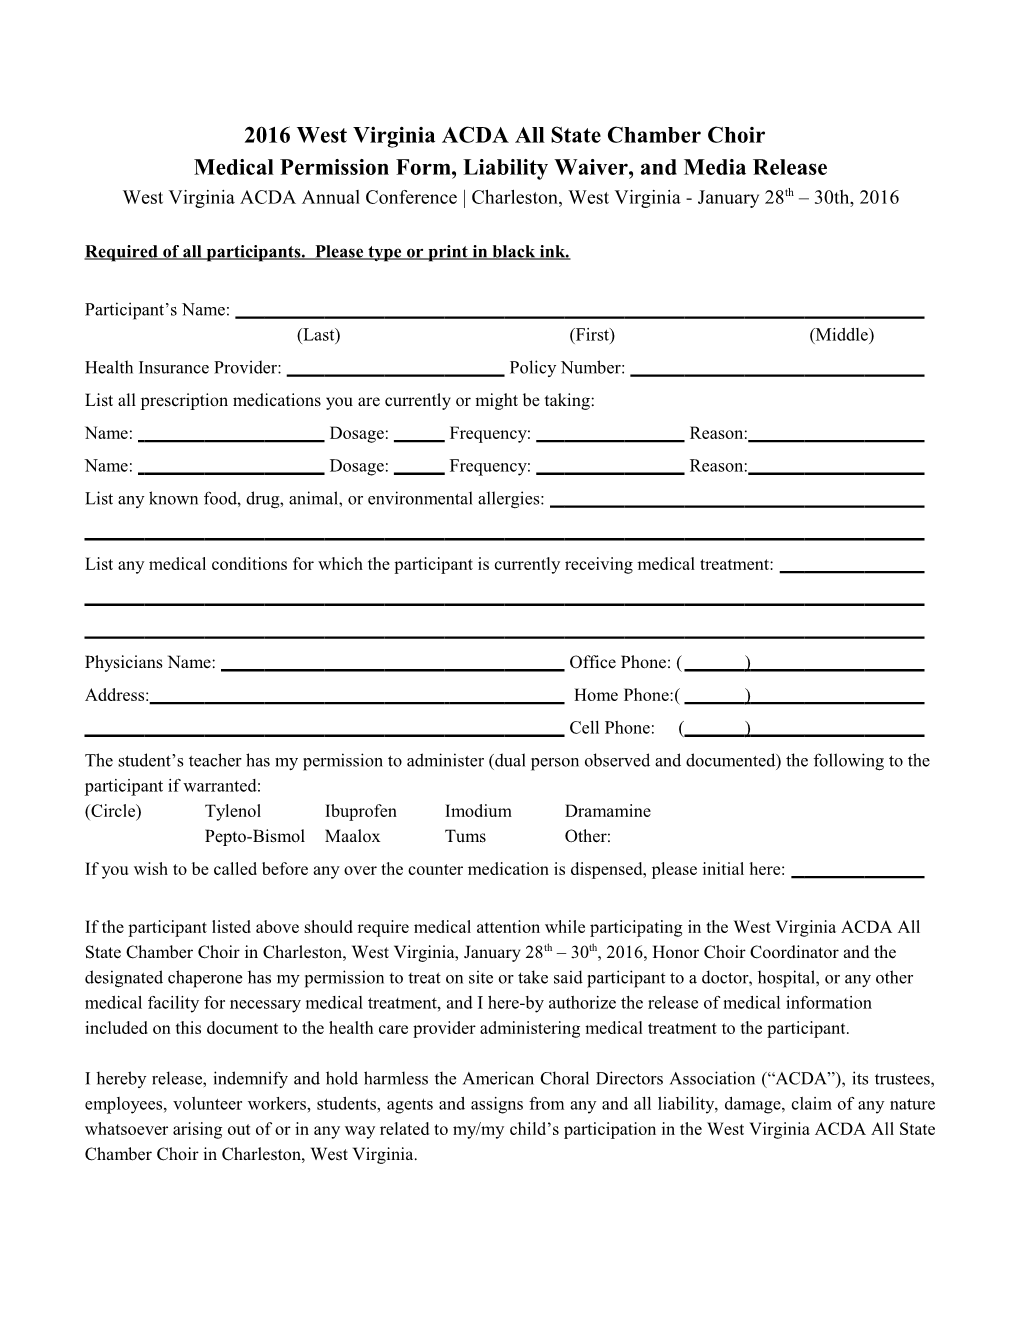 ACDA NAME Honor Choir Medical Permission Form and Liability Waiver